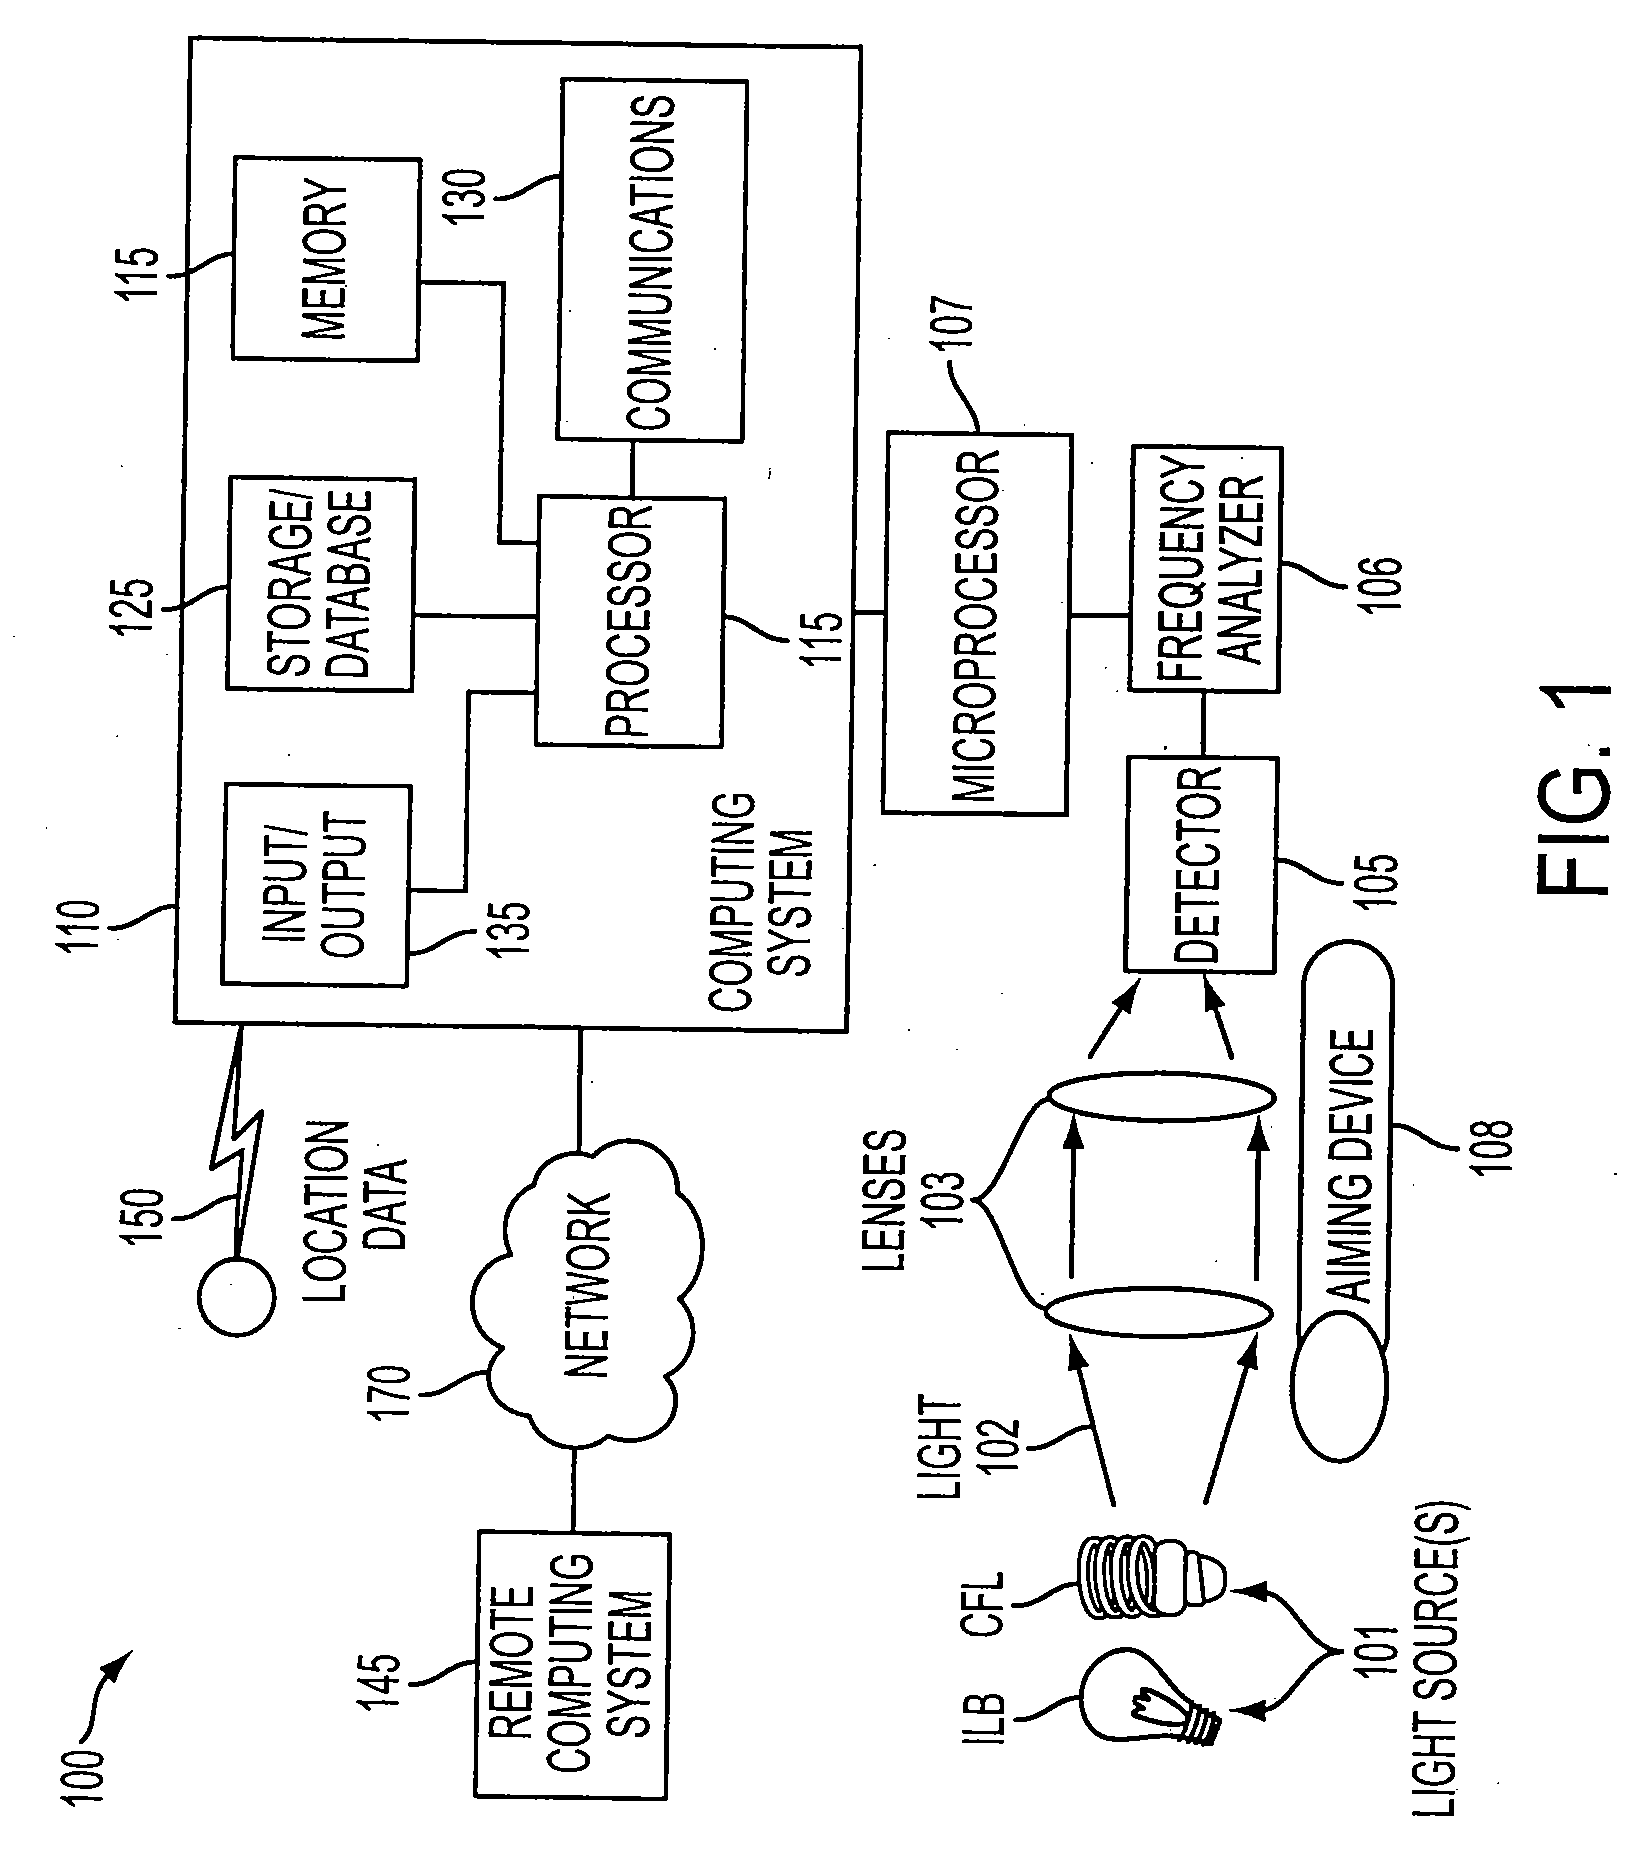 Method and apparatus for failure detection in lighting systems